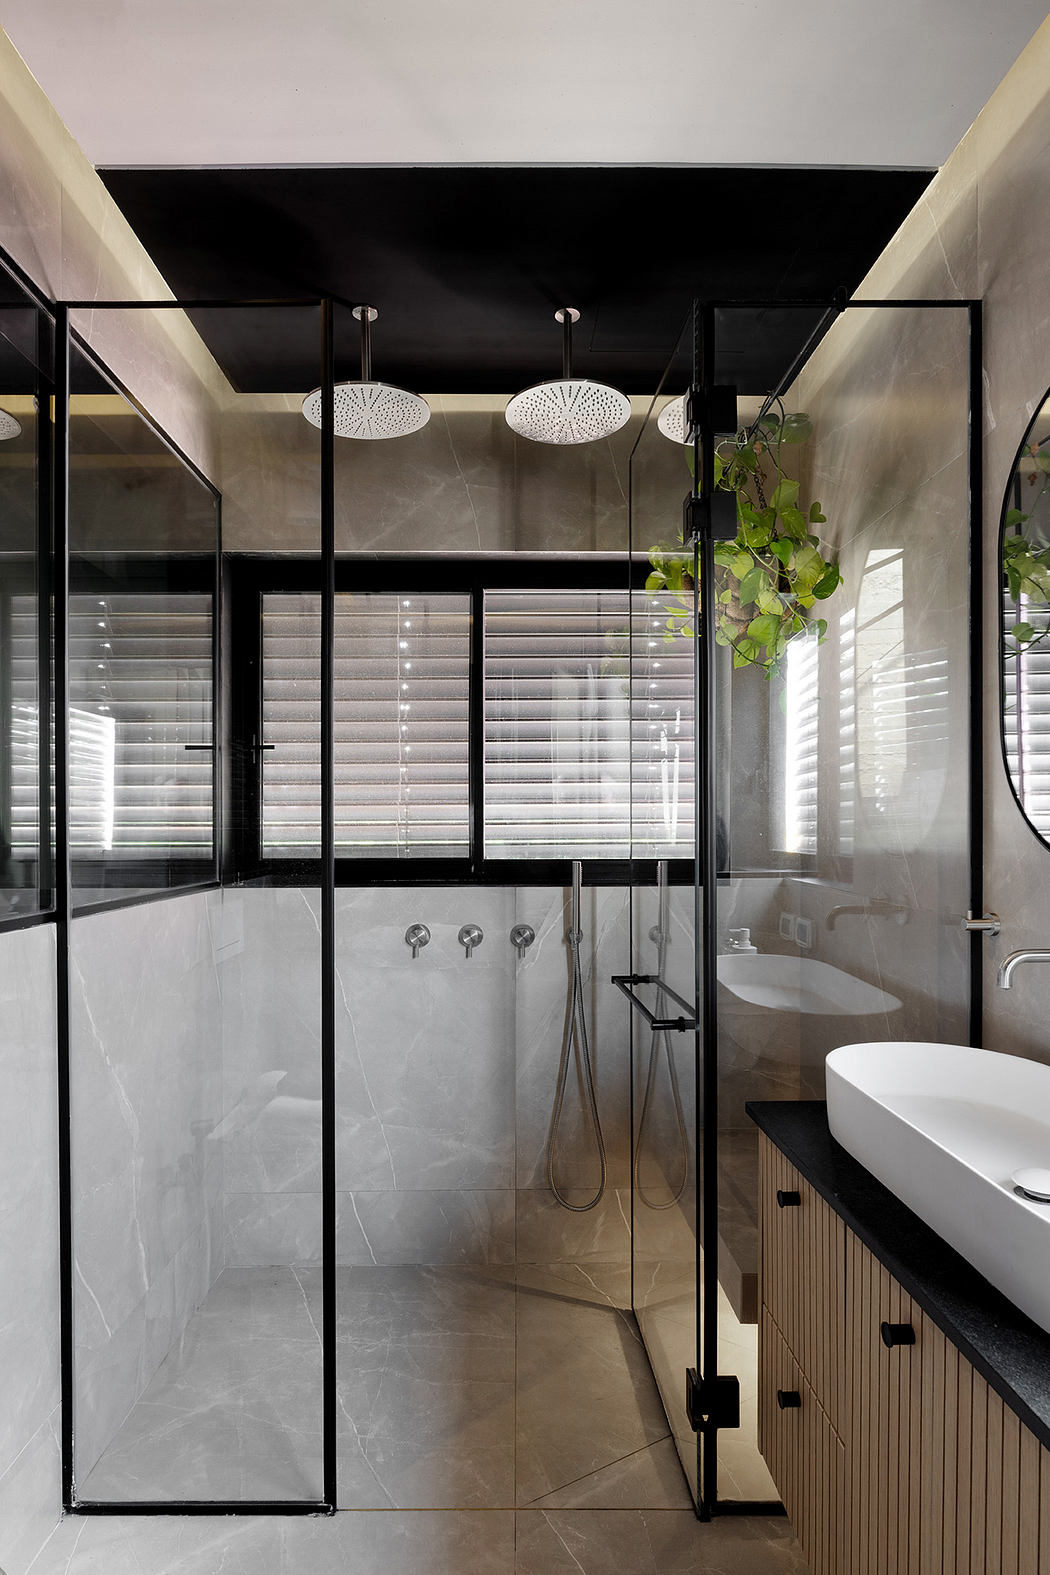 Modern bathroom with glass shower, wooden vanity, and hanging plants.